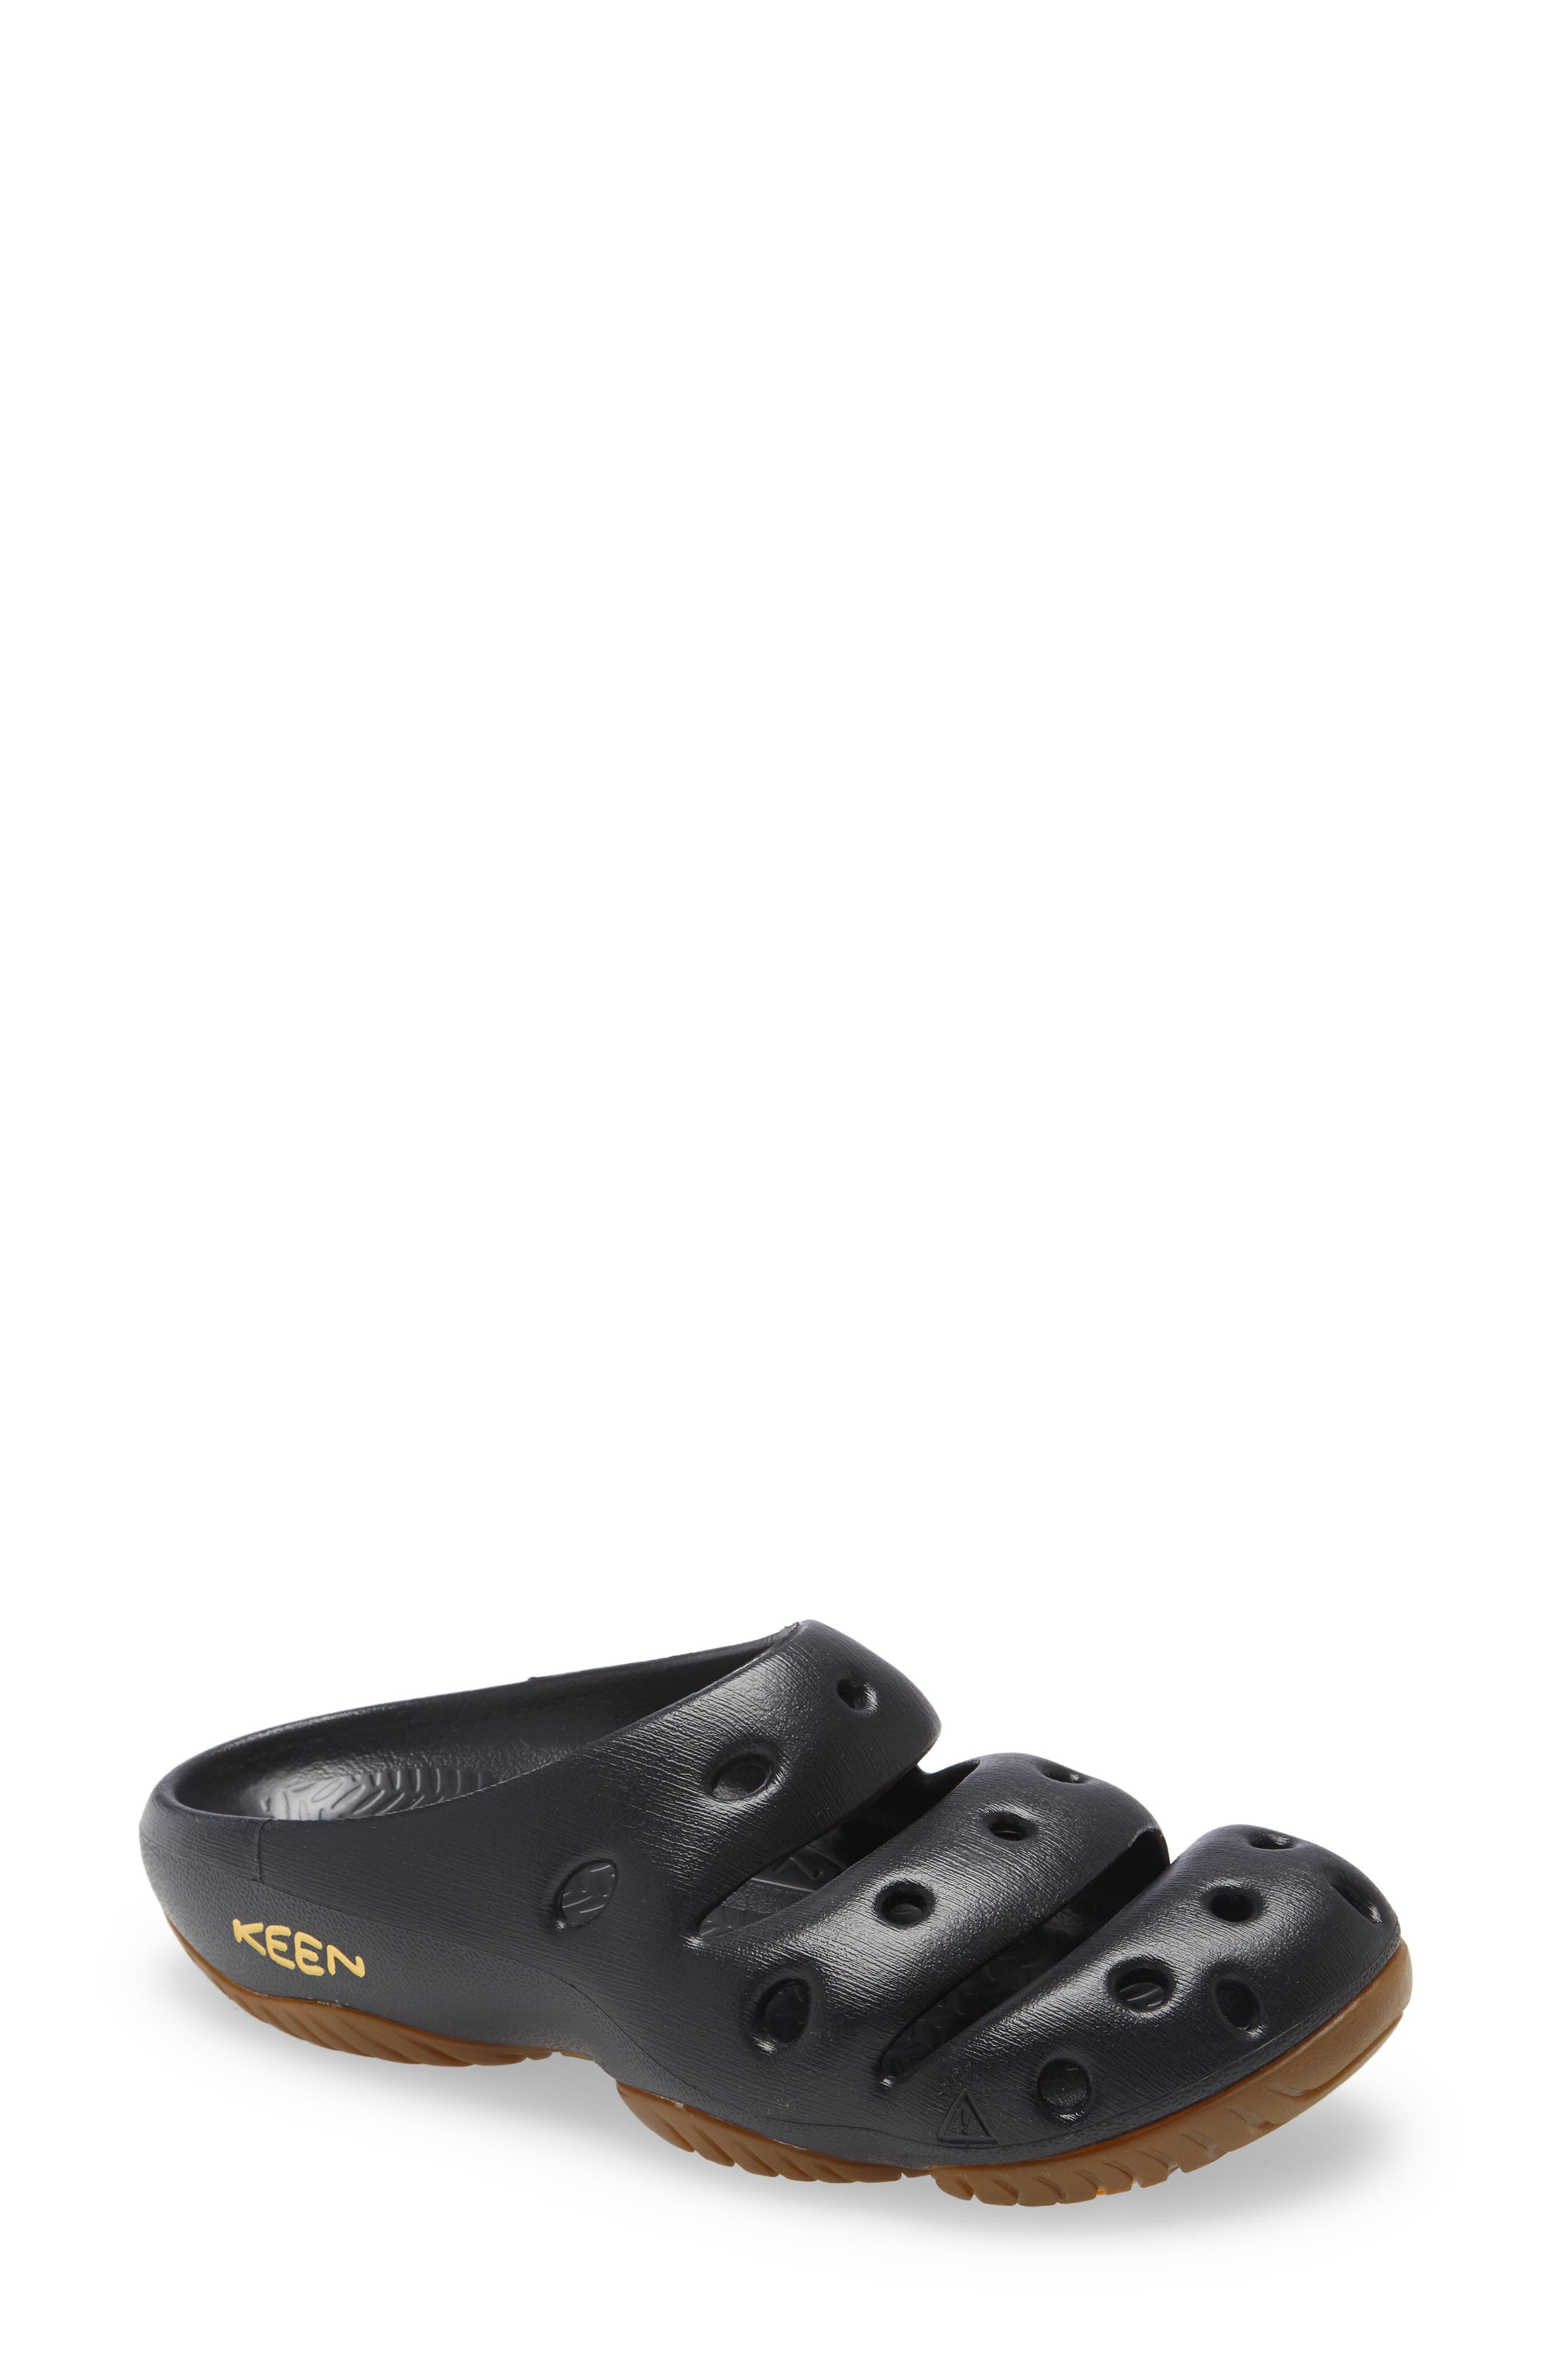 UPC 871209010905 product image for KEEN Yogui Slip-On, Size 8 in Black at Nordstrom | upcitemdb.com